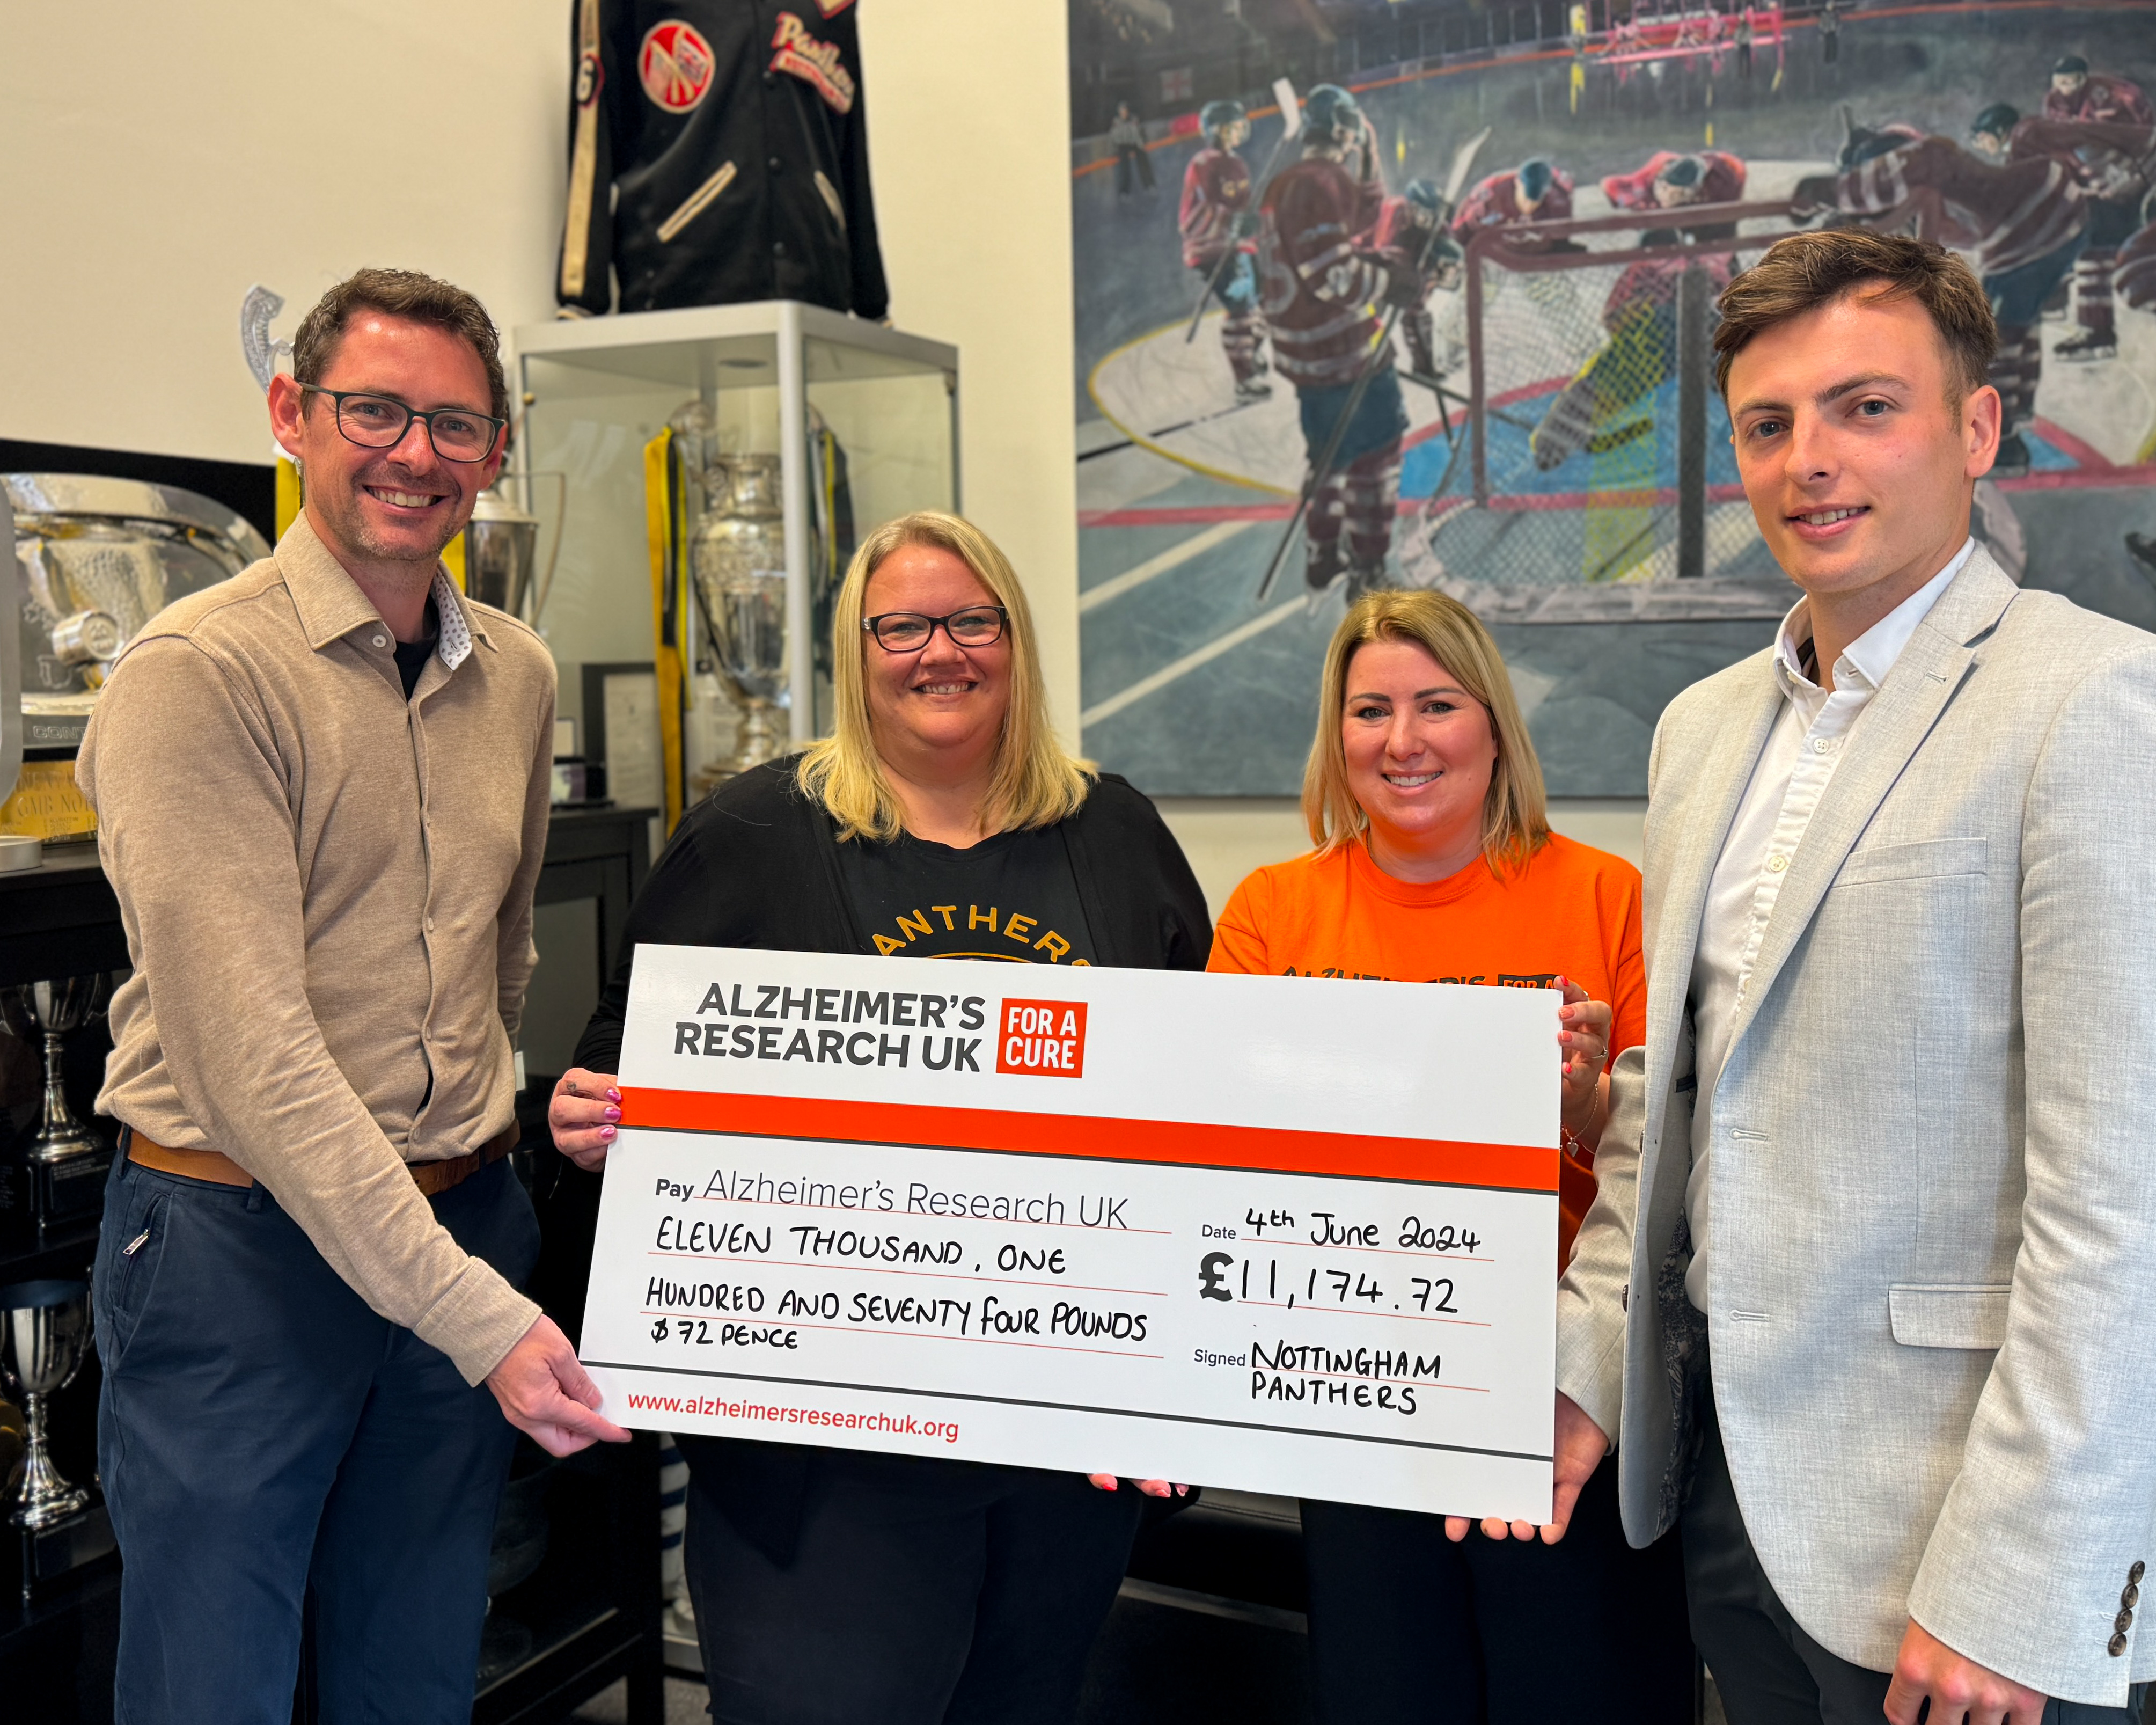 OVER £11,000 RAISED FOR ALZHEIMER’S RESEARCH UK Top Image